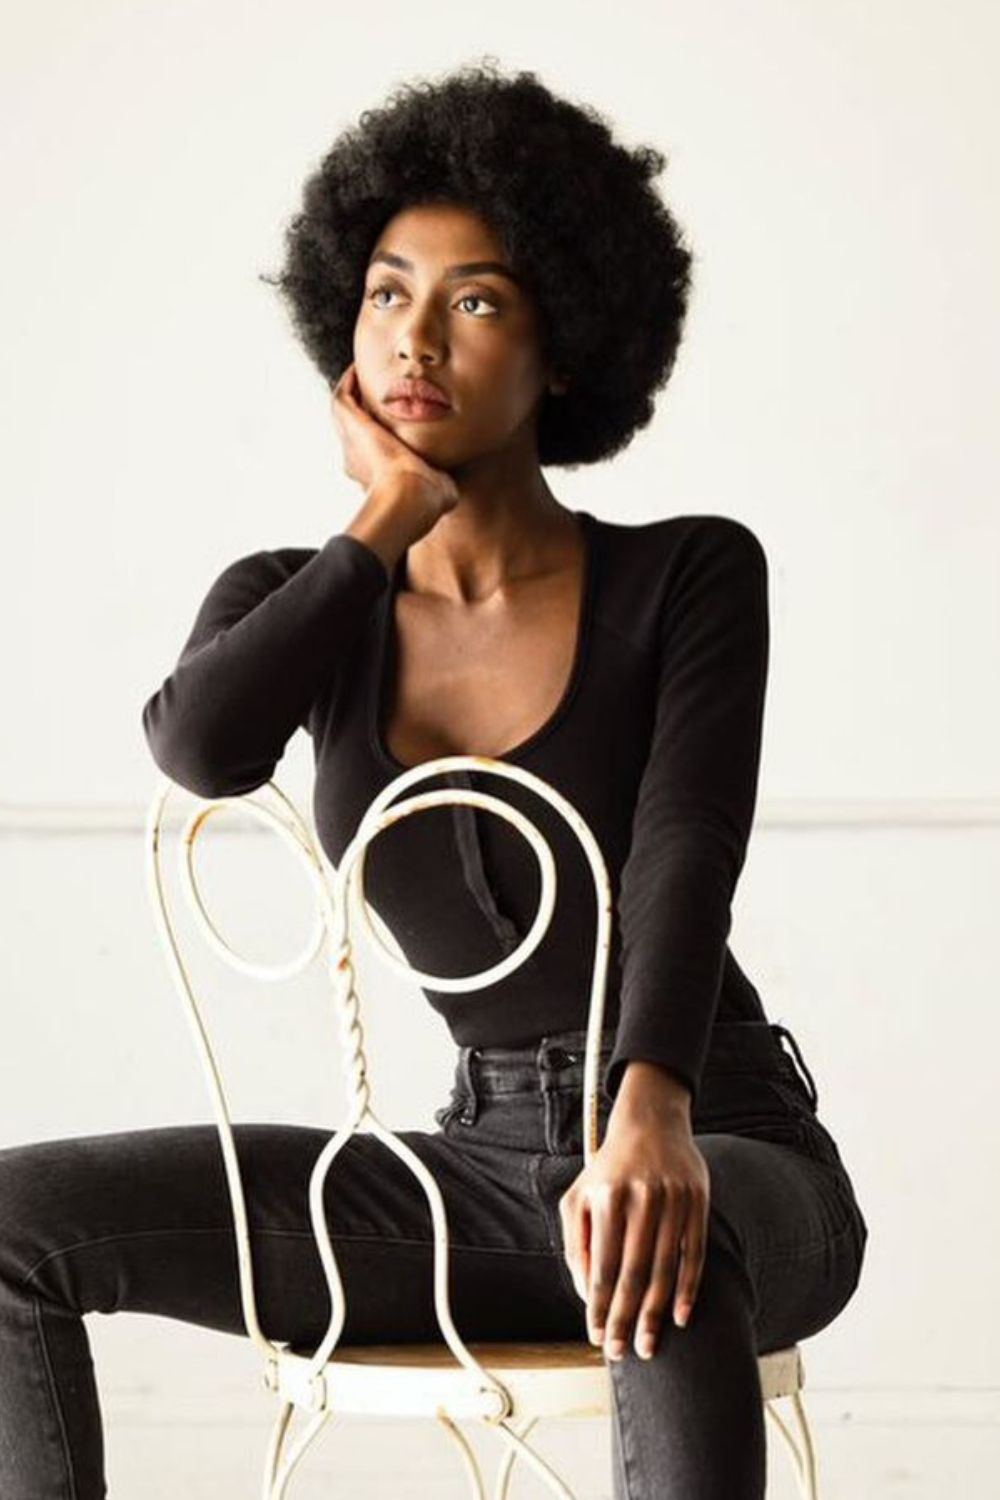 A black woman with a classic Afro hairstyle.